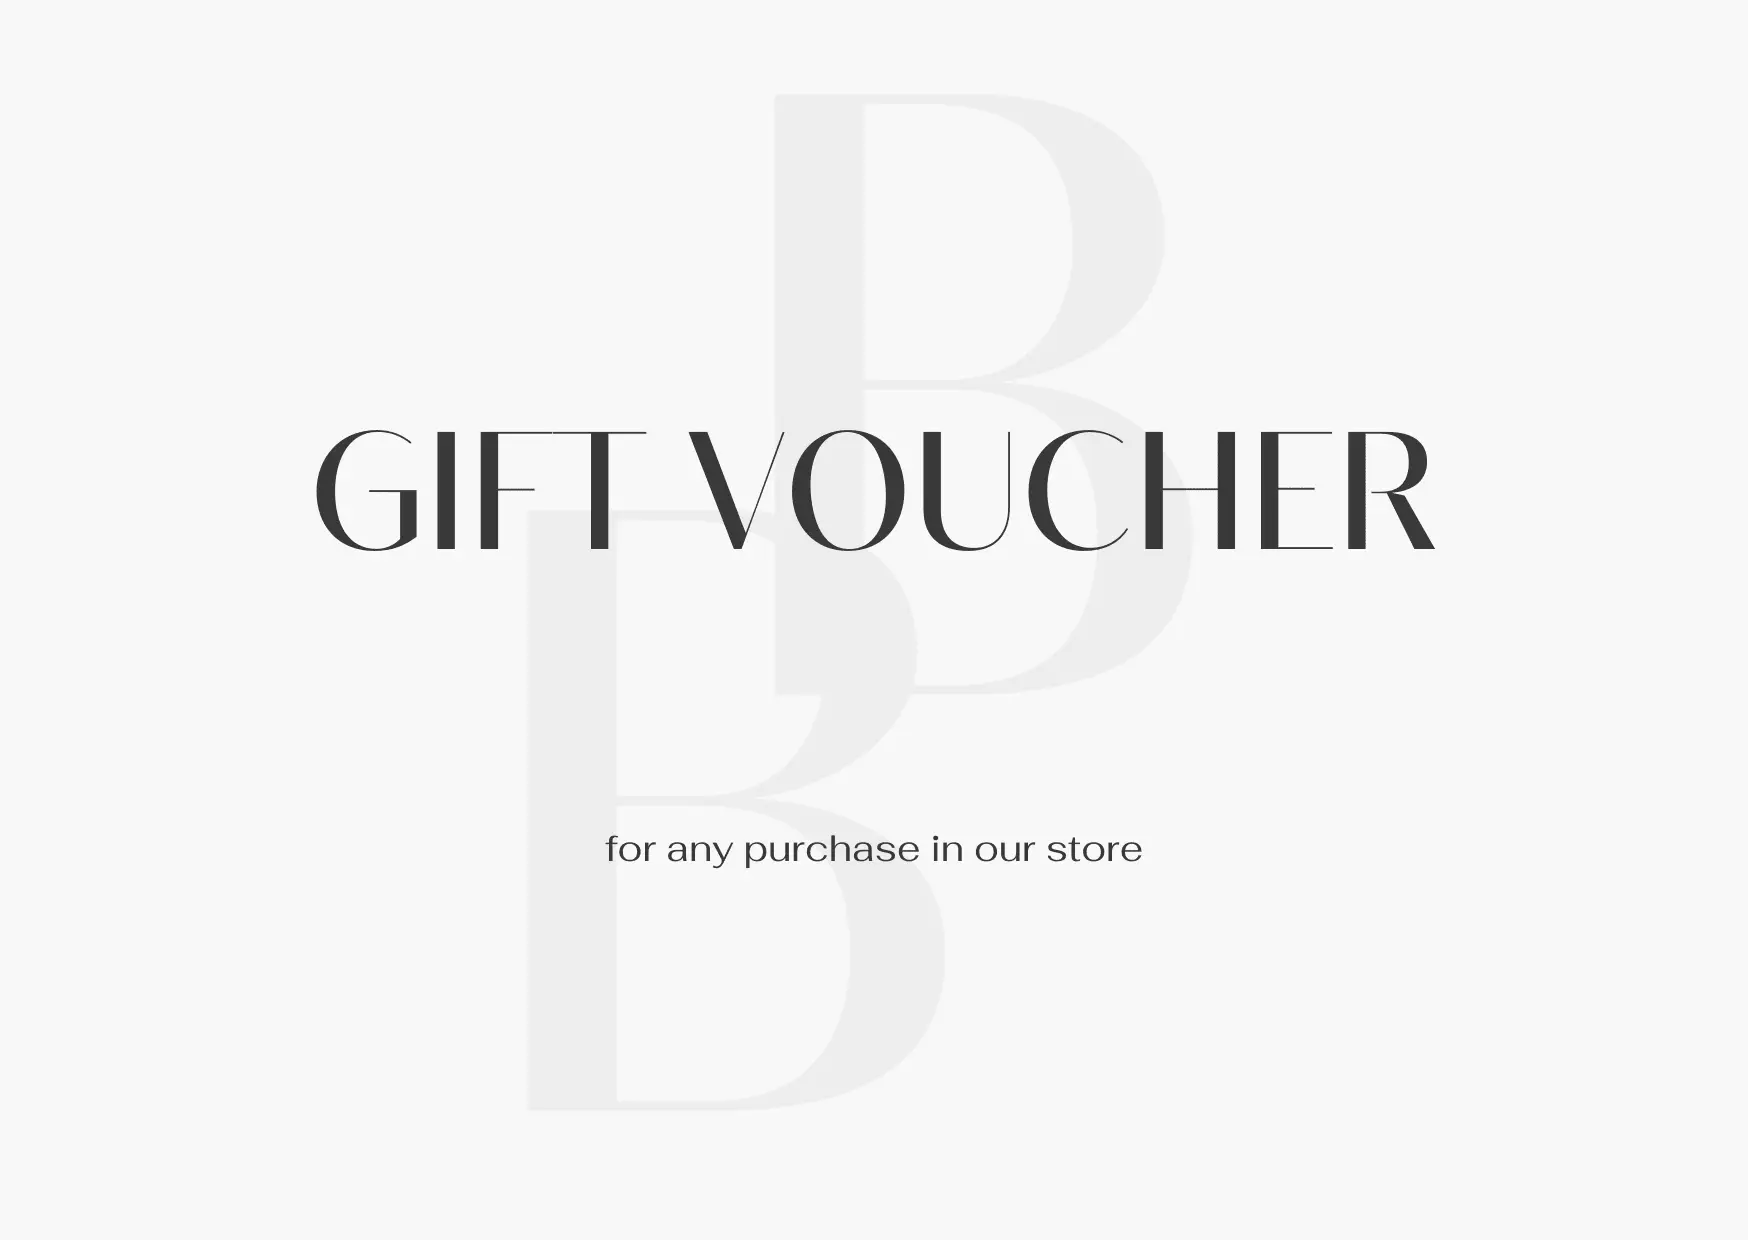 Treat Your Loved Ones with a Gift Voucher - Bark Bites